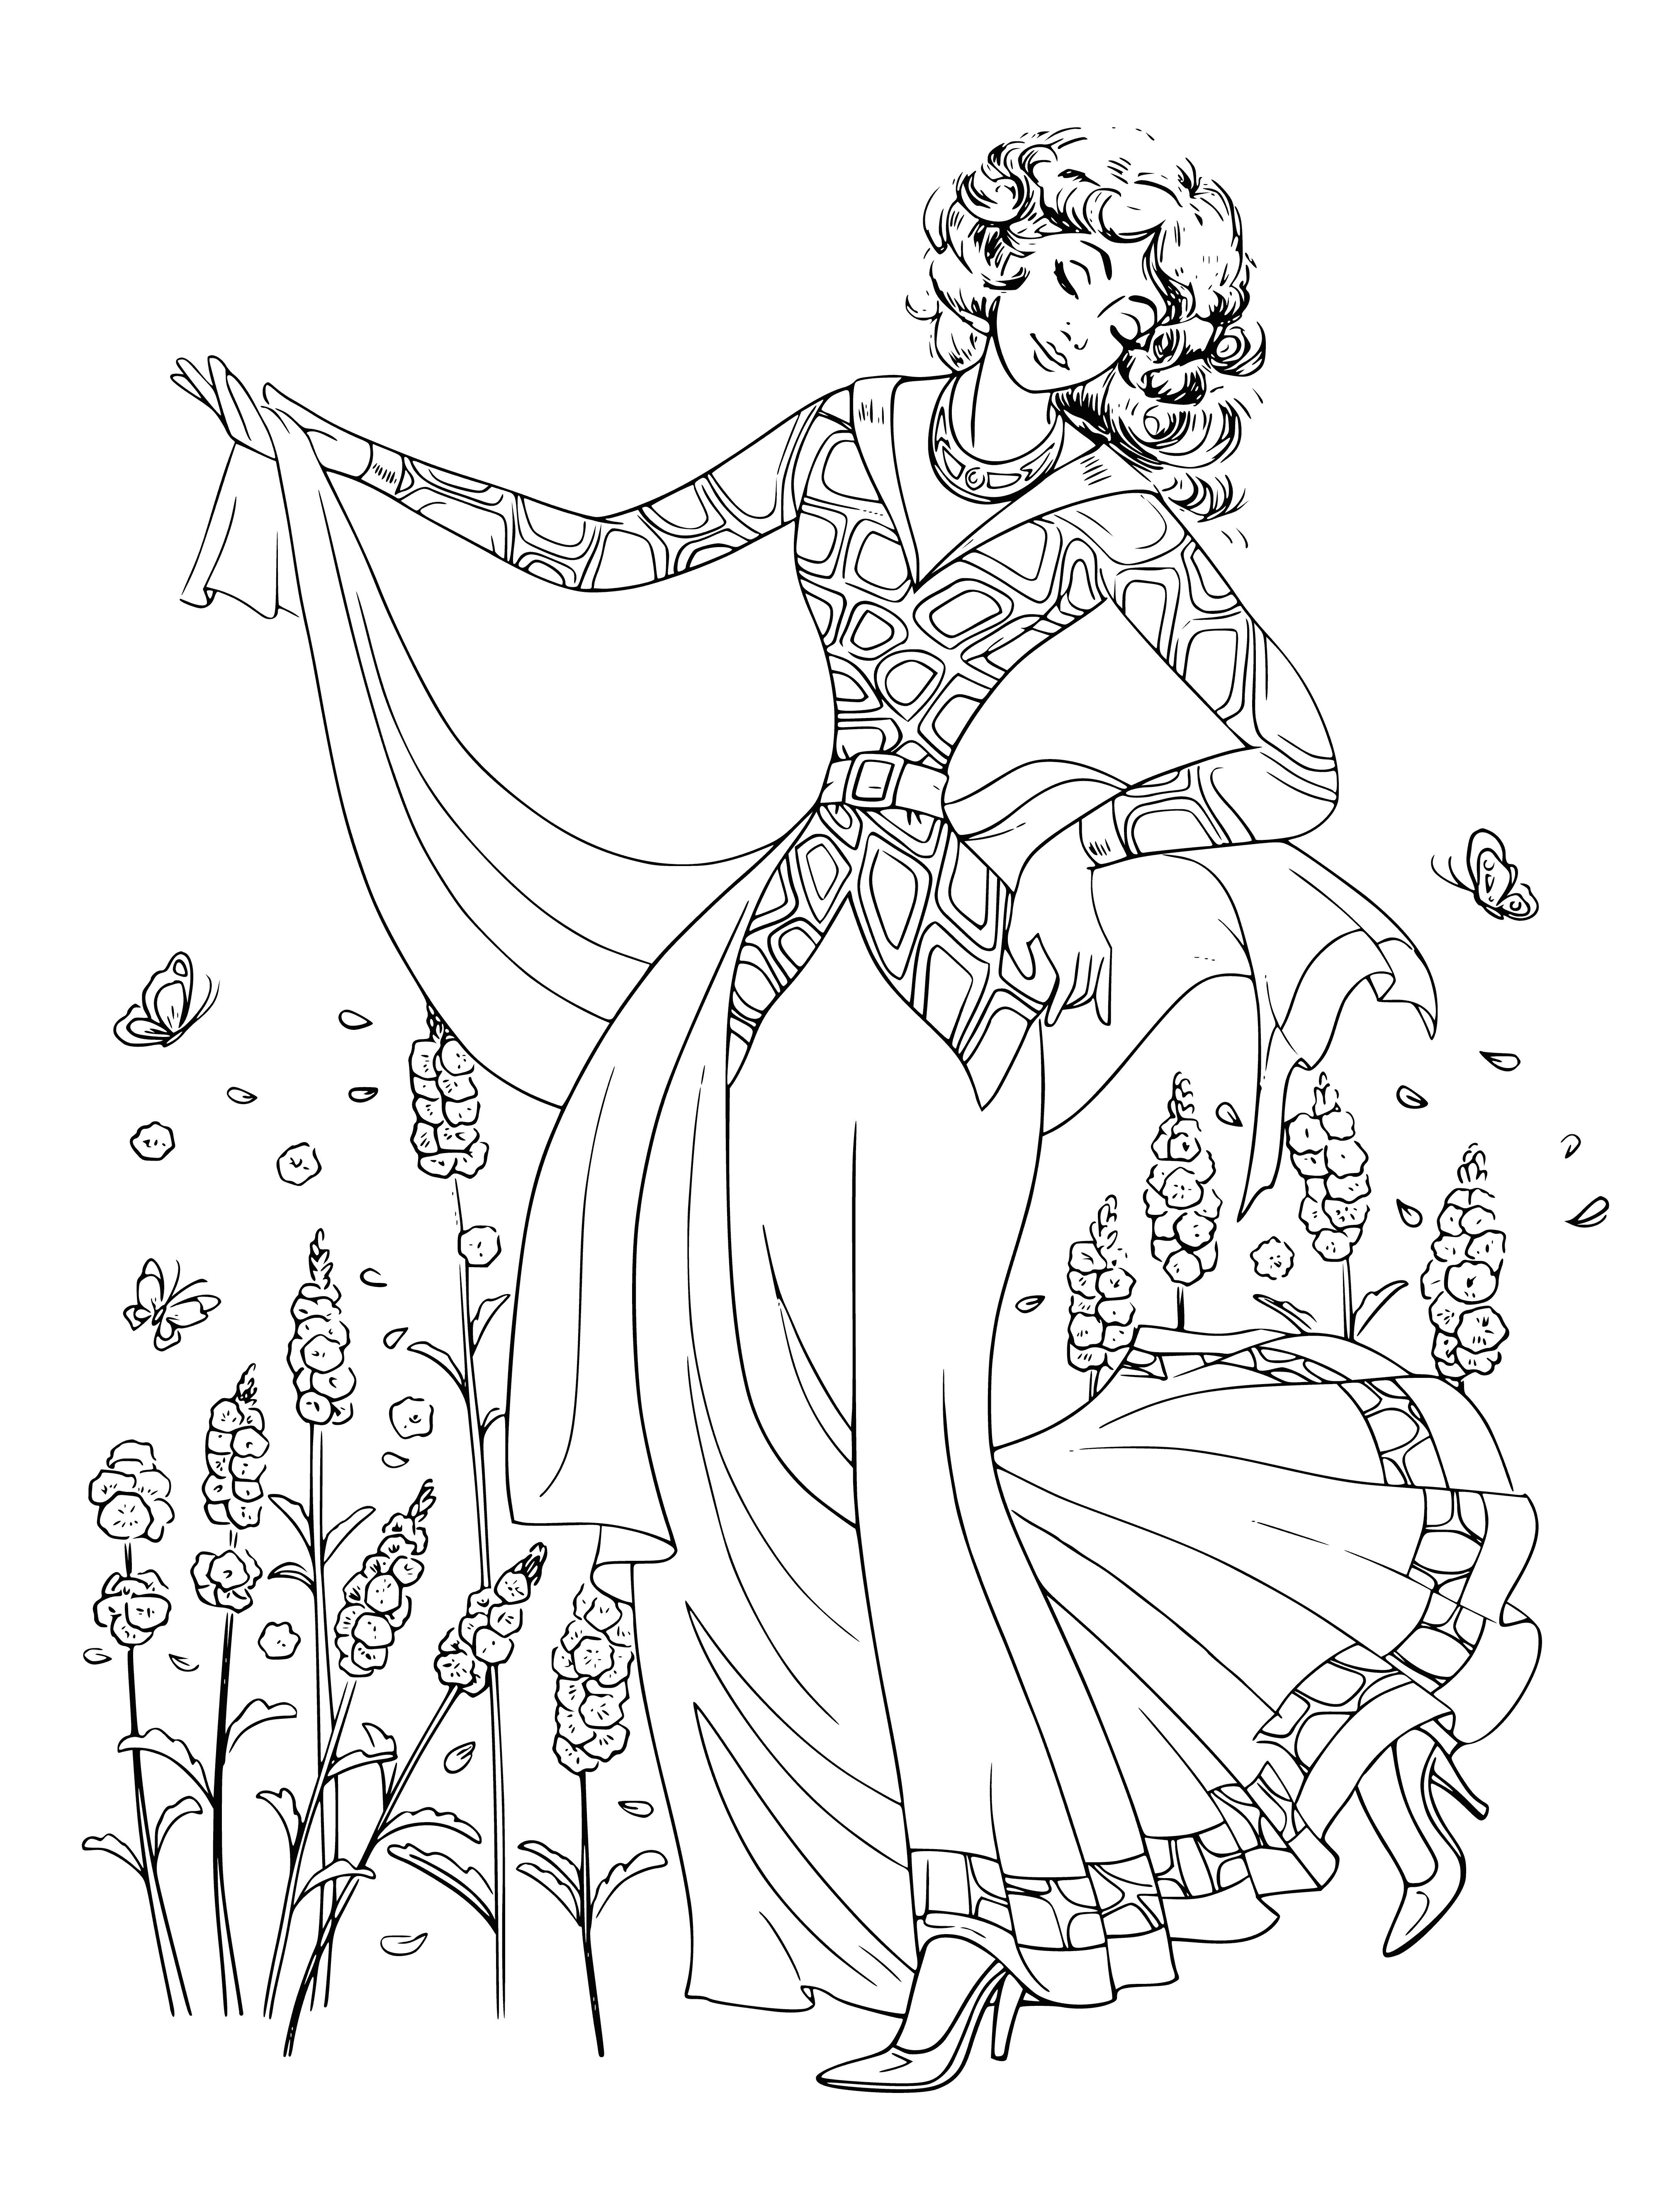 coloring page: An elegant lady surrounded by intricate designs holds a bouquet of flowers, with a gentle expression.